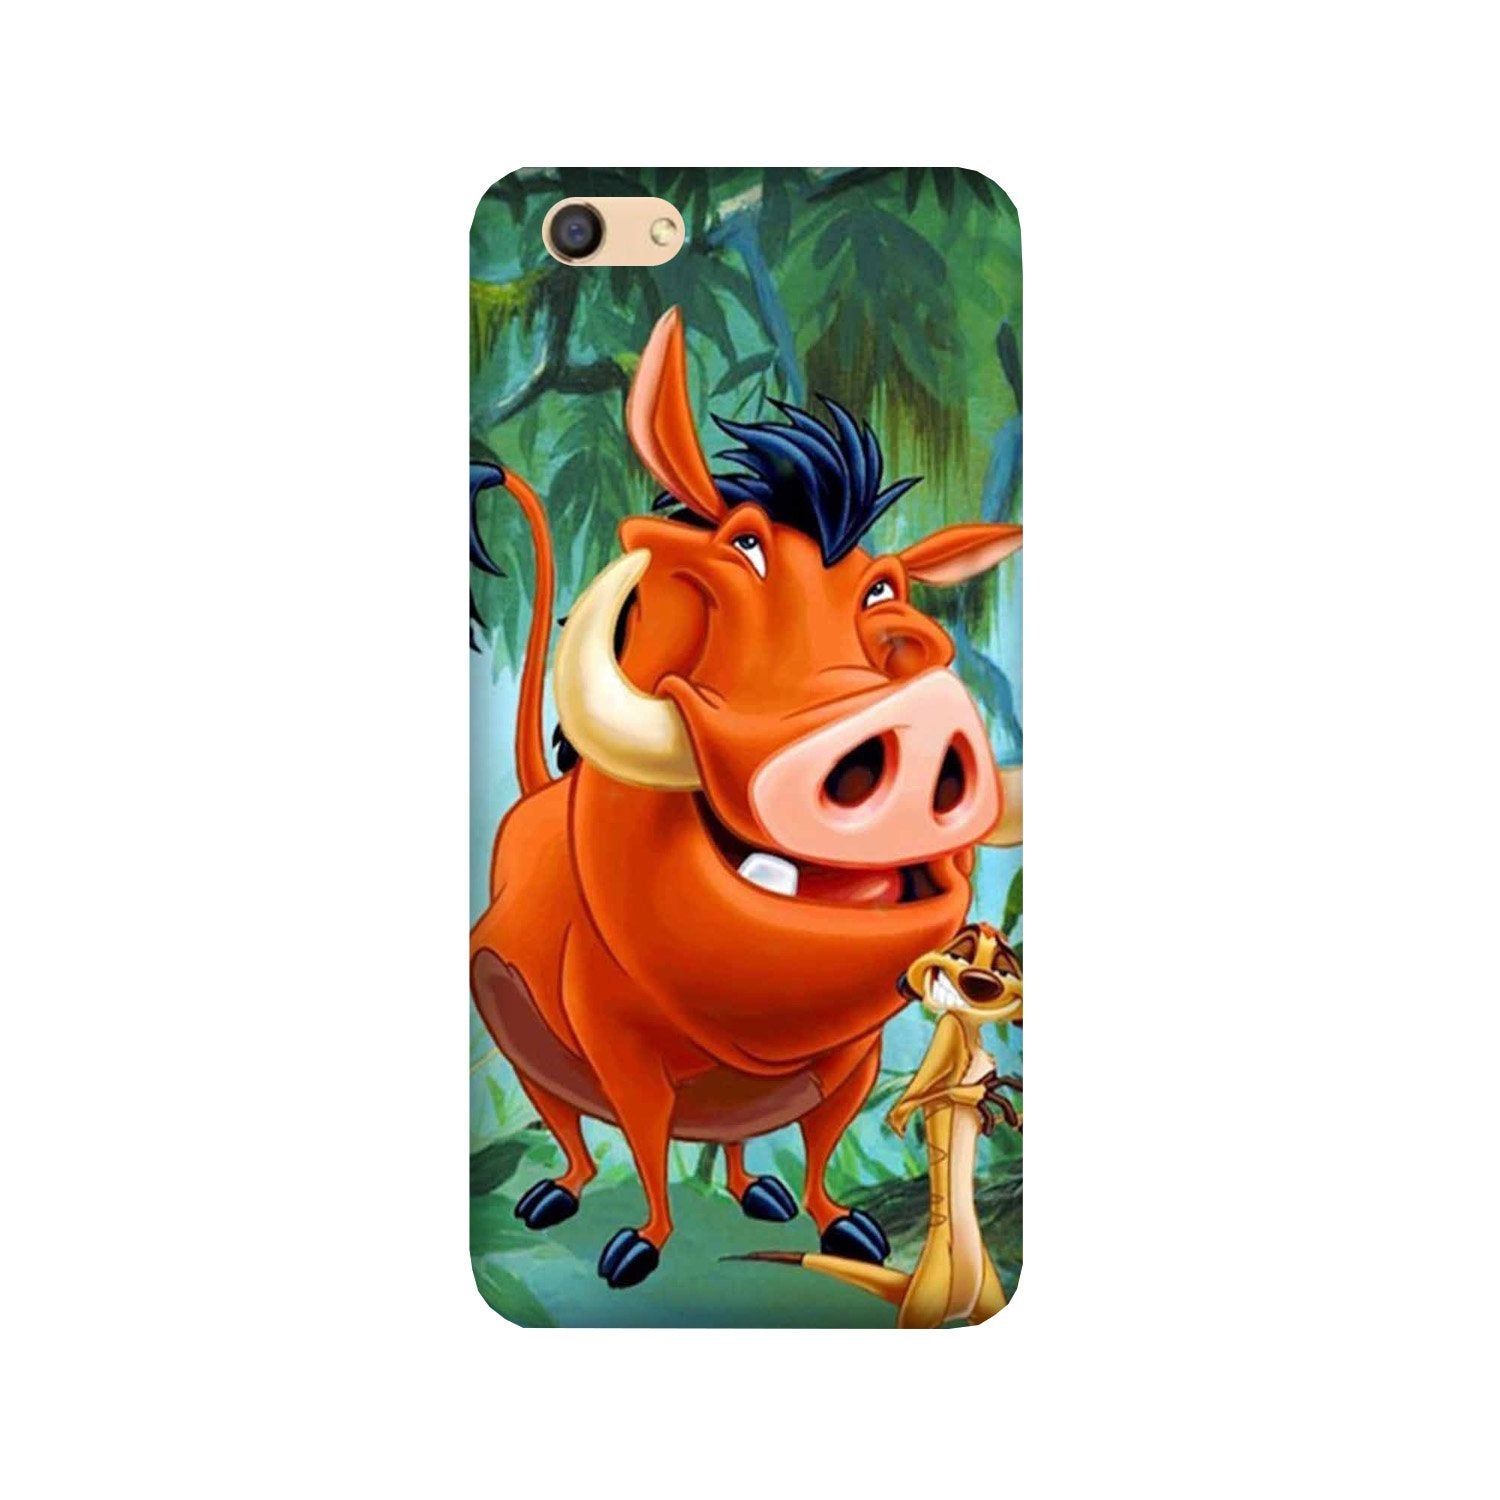 Timon and Pumbaa Mobile Back Case for Oppo F3(Design - 305)